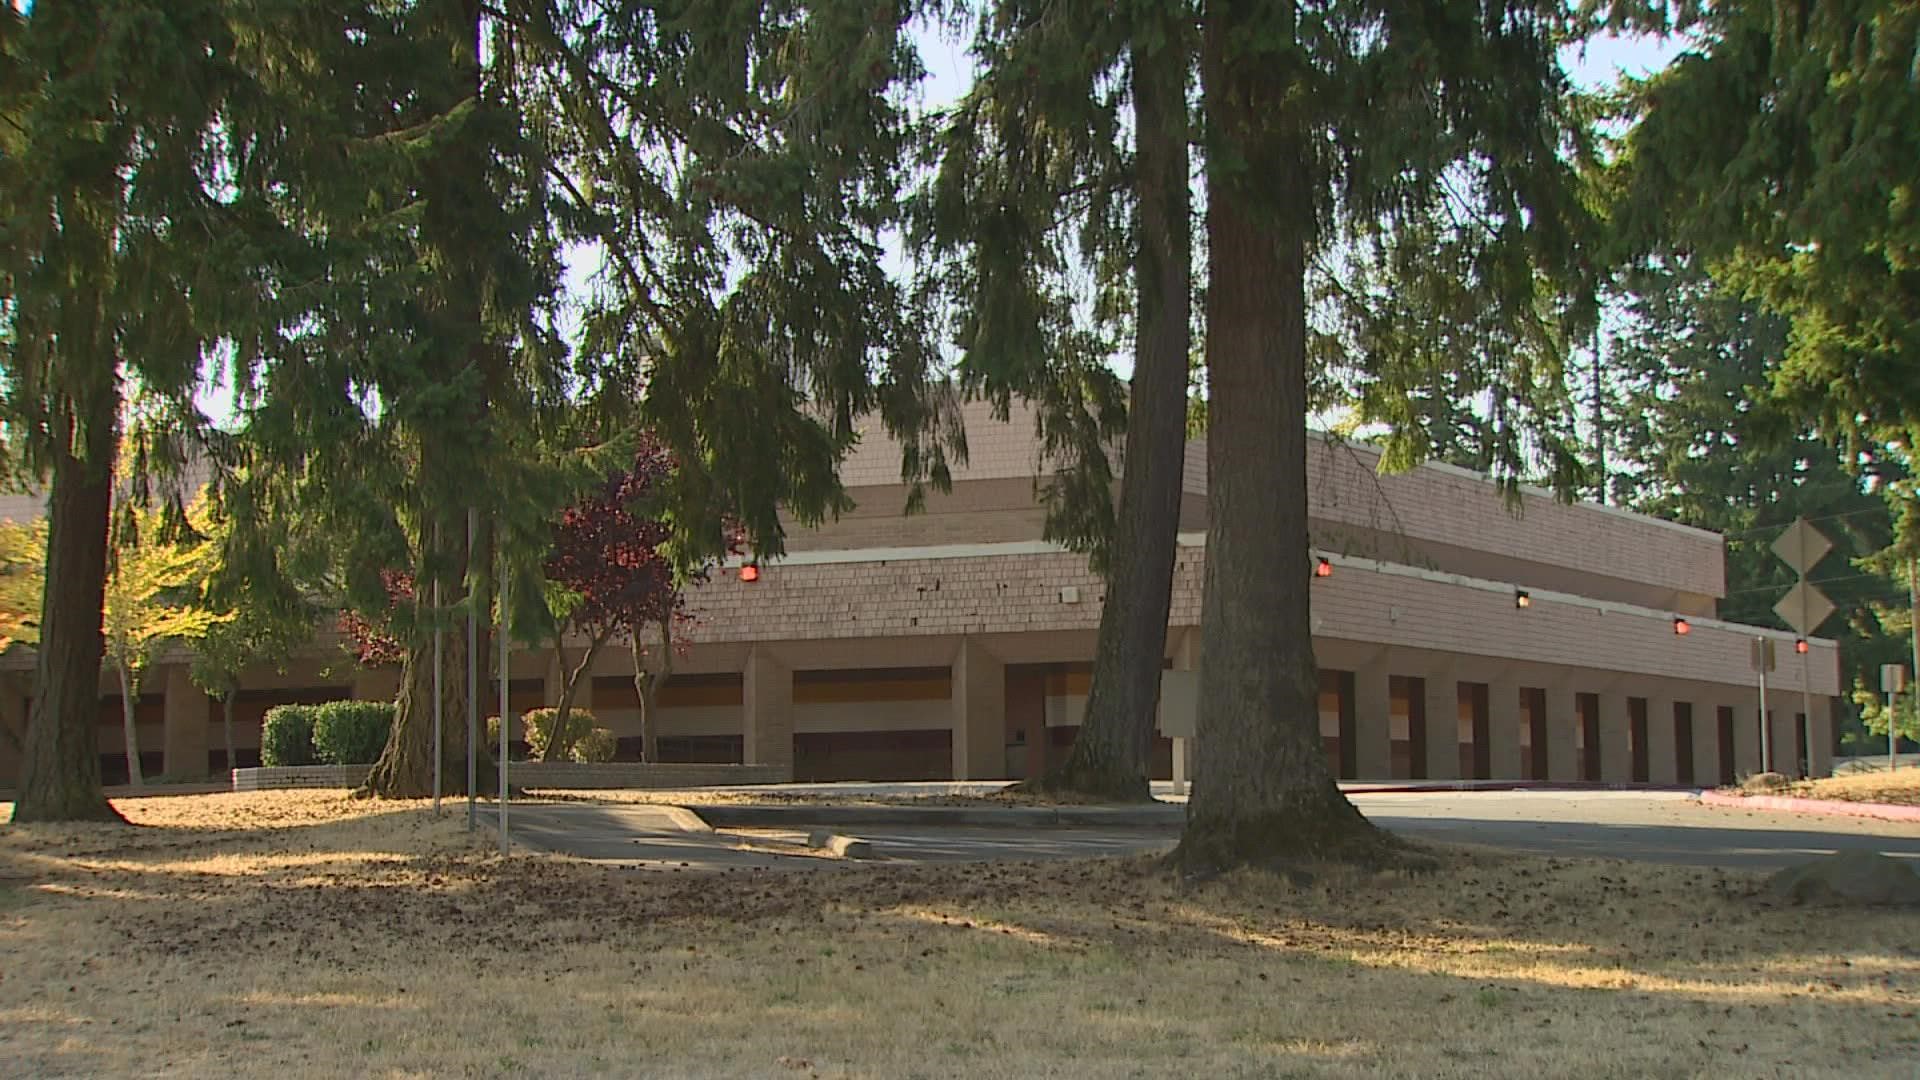 53 students and staff at Kamiakin Middle School may have been exposed to COVID-19 after someone at the school tested positive, the school district said.